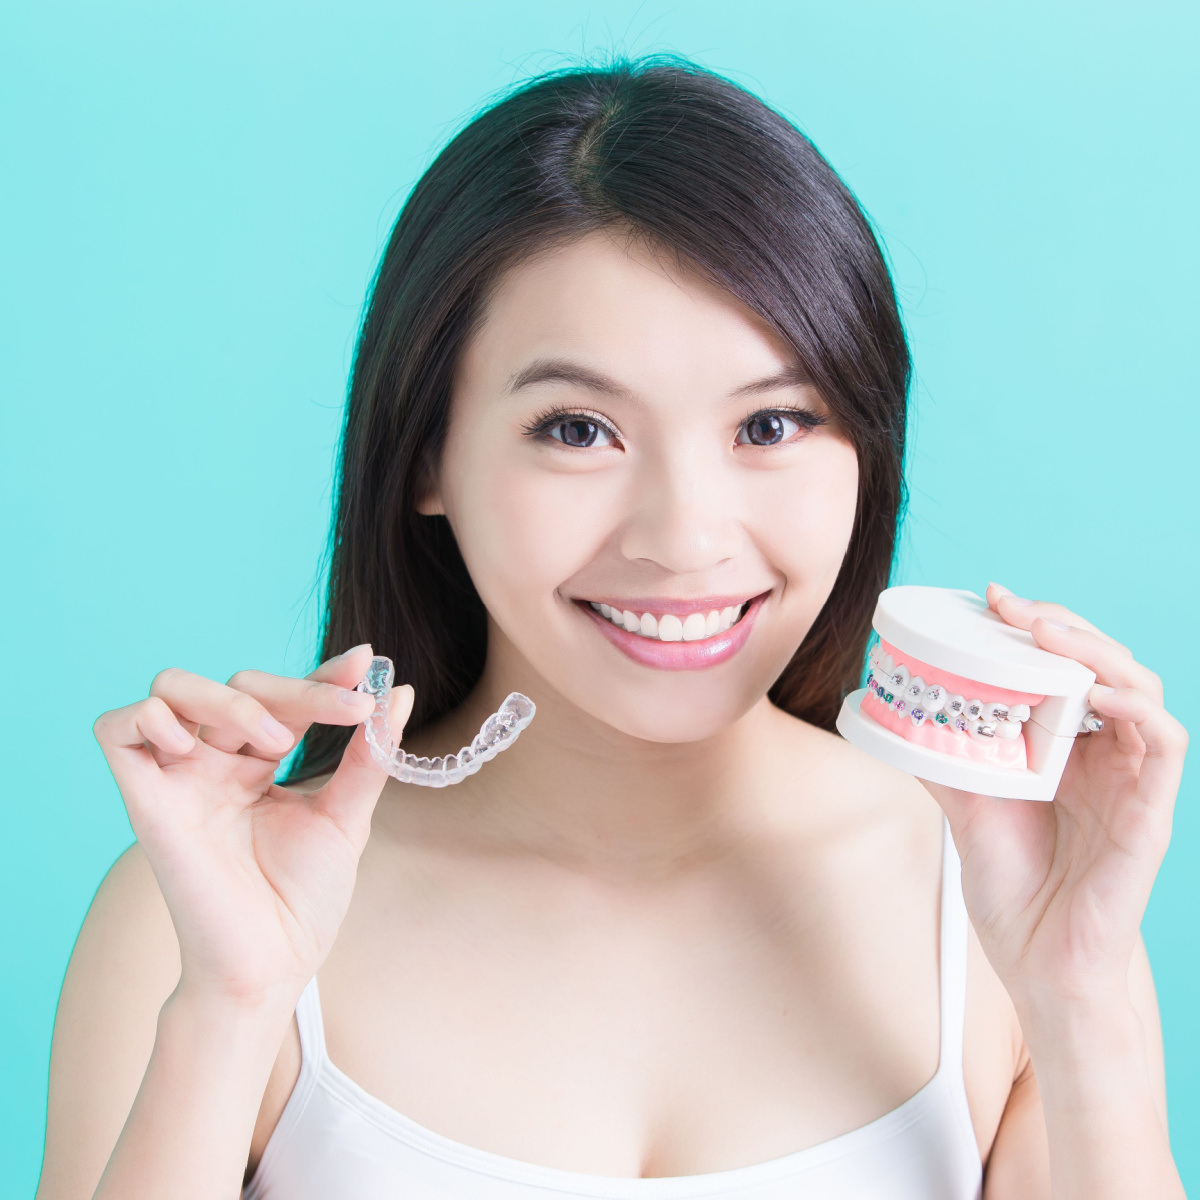 How Our Houston Dentist Decides if Invisalign or Dental Braces Are Right for You